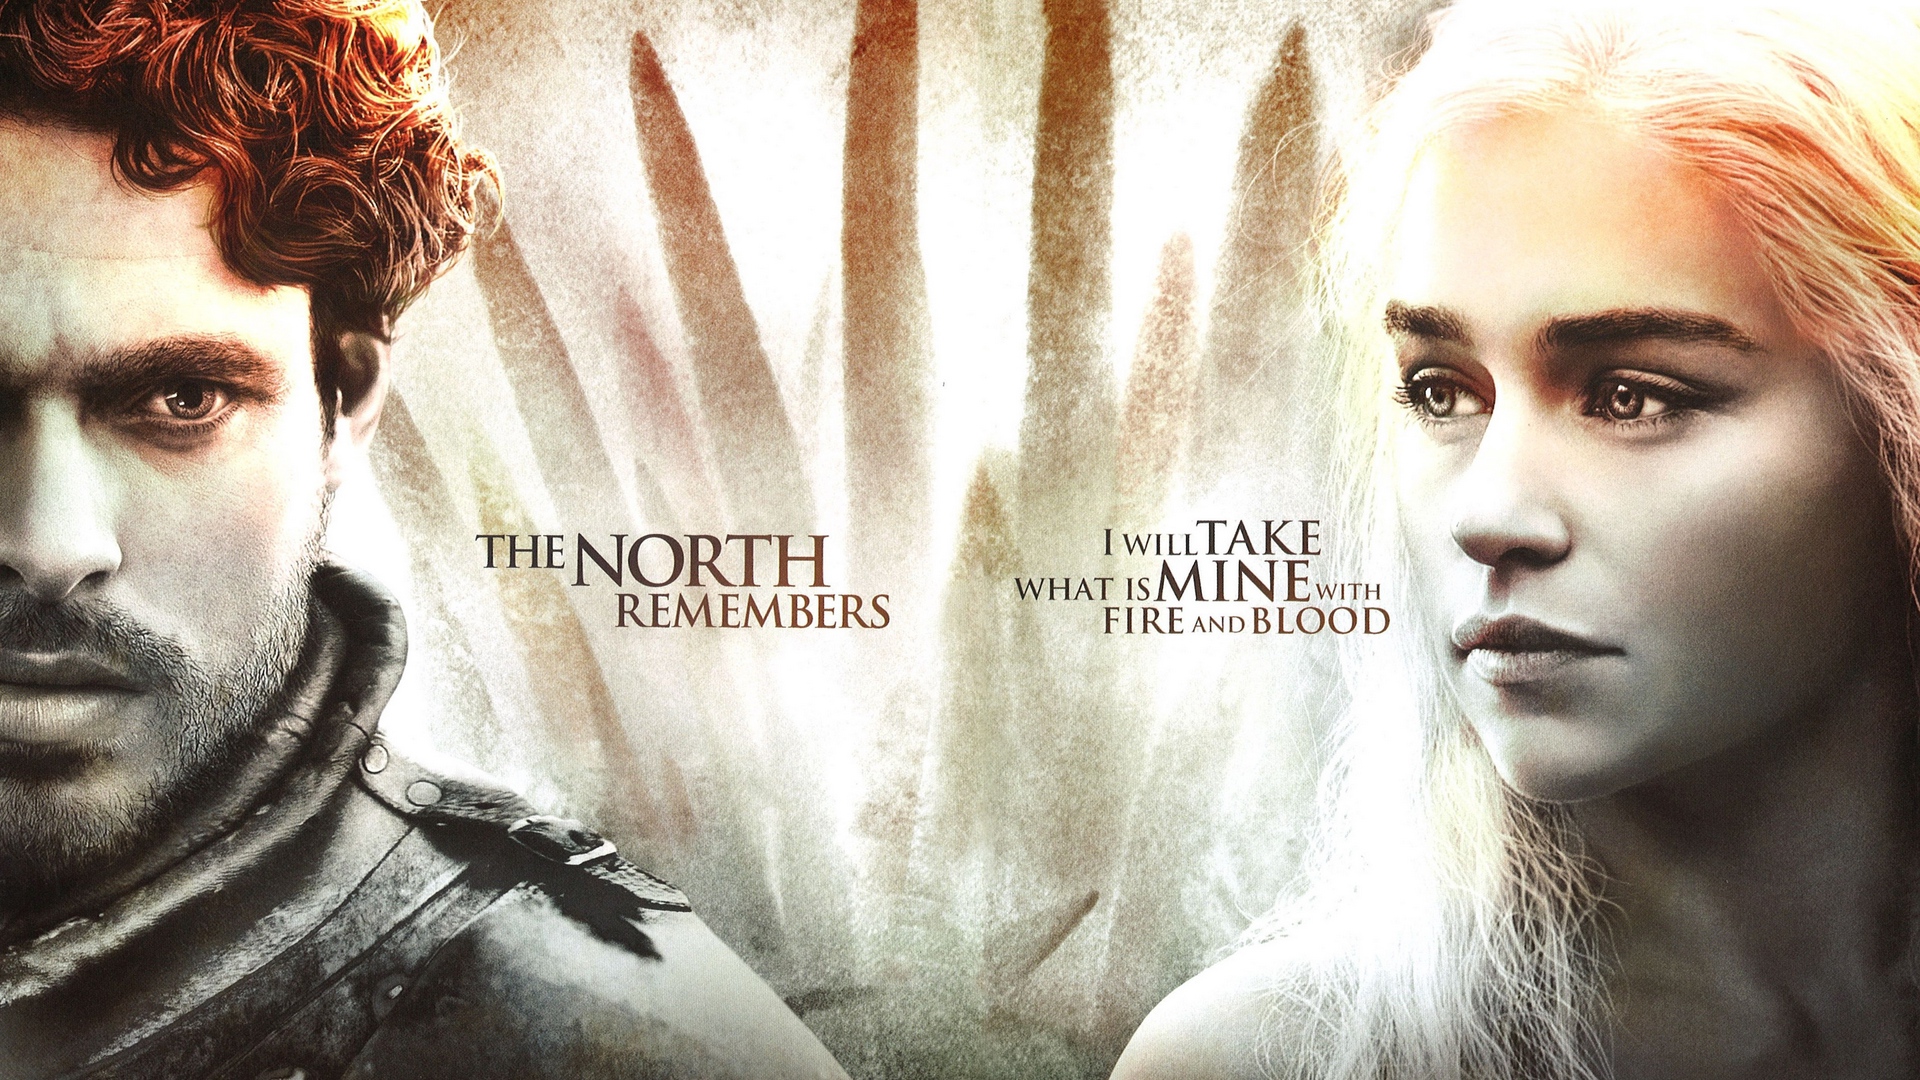 daenerys wallpaper hd,movie,font,poster,album cover,photography